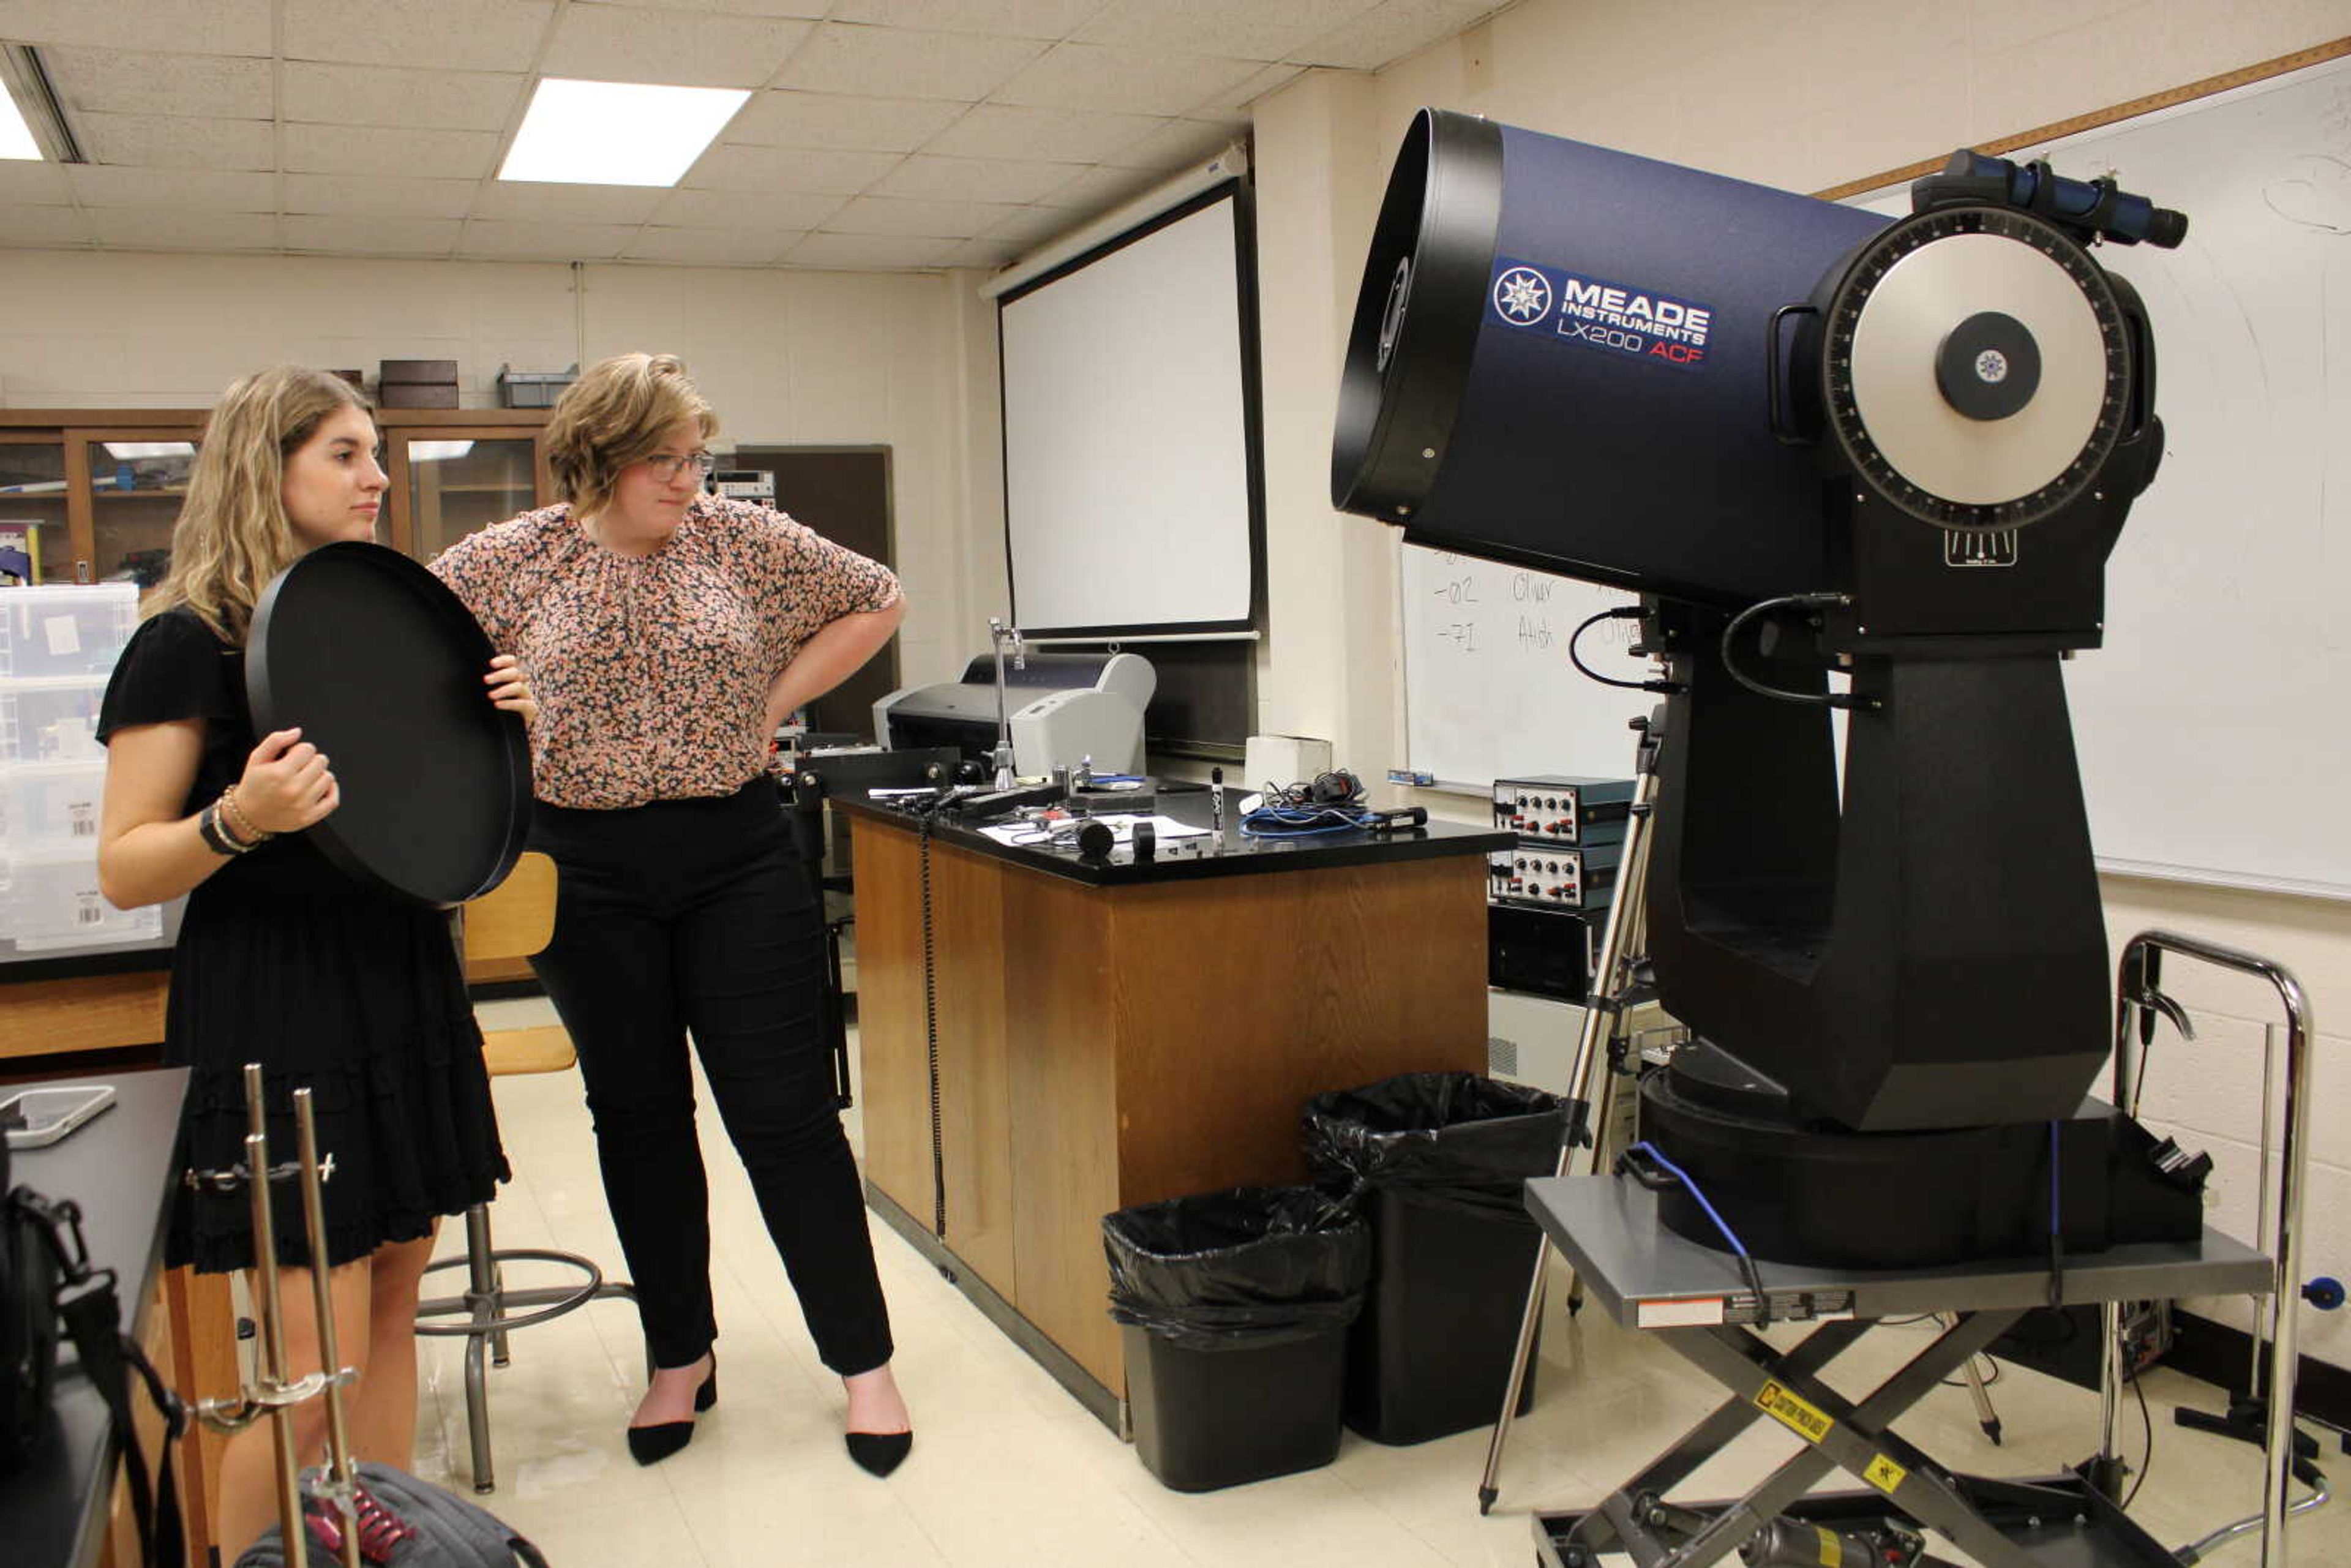 (Left) Brianna Mills and Sophia Hodge observe the new telescope in Rhodes Hall room 301 after describing more about its functions and accessibility on Sept. 21. The telescope itself weighs around 300 pounds, and the tripod that it is mounted on during setup weighs around 75 pounds.